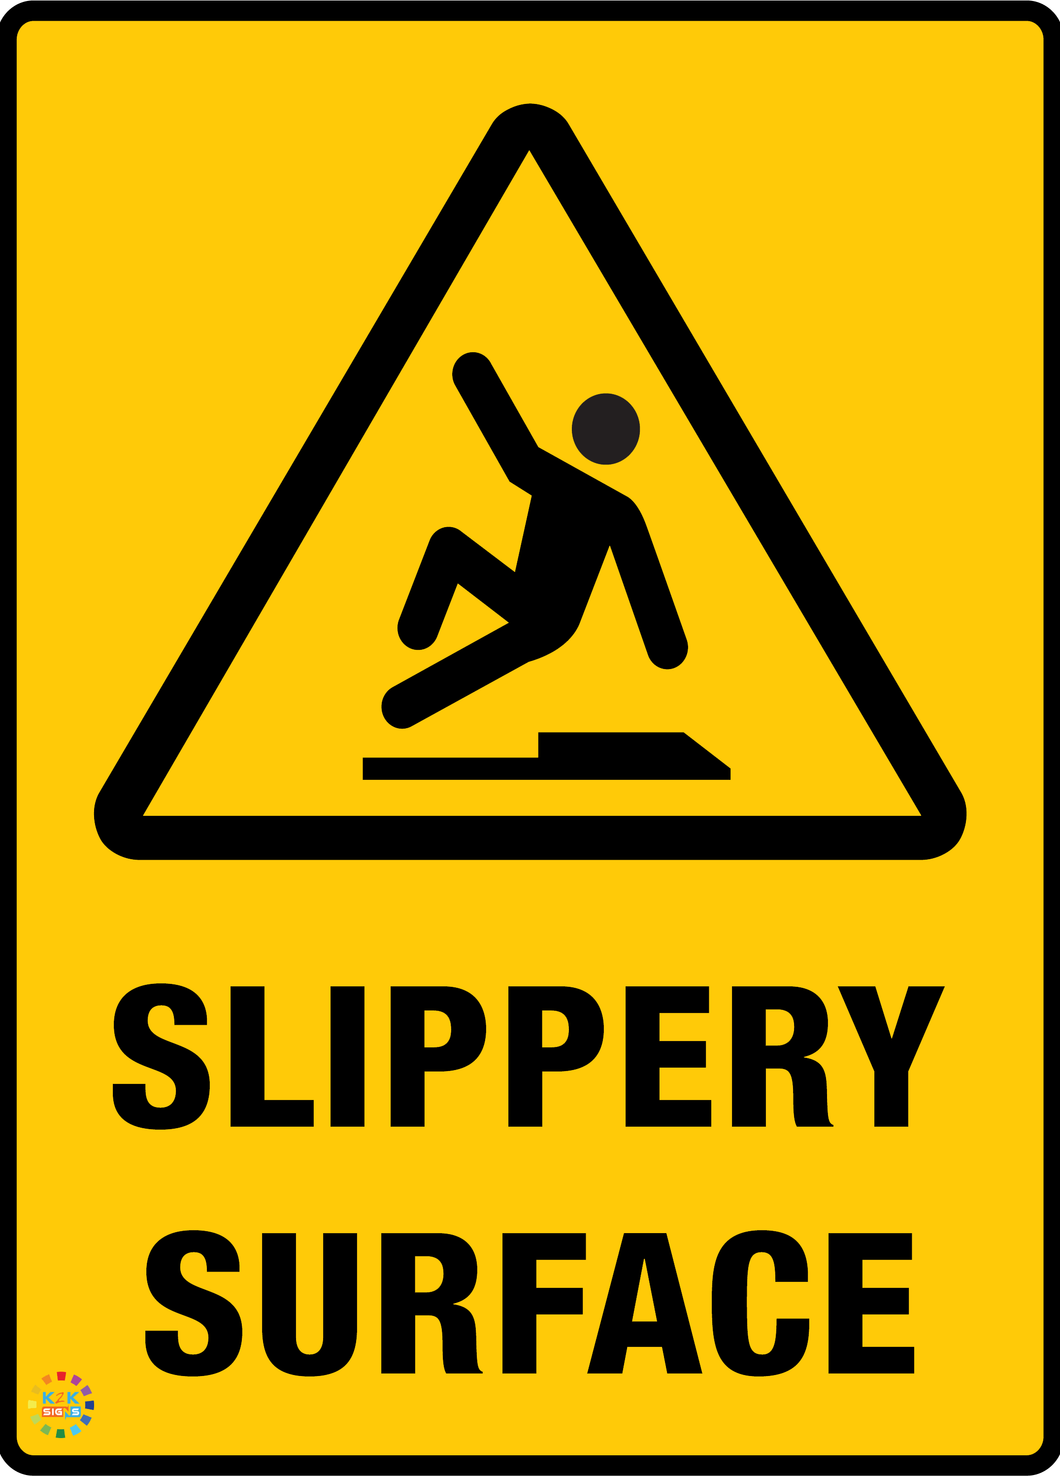 Slippery<br/> Surface